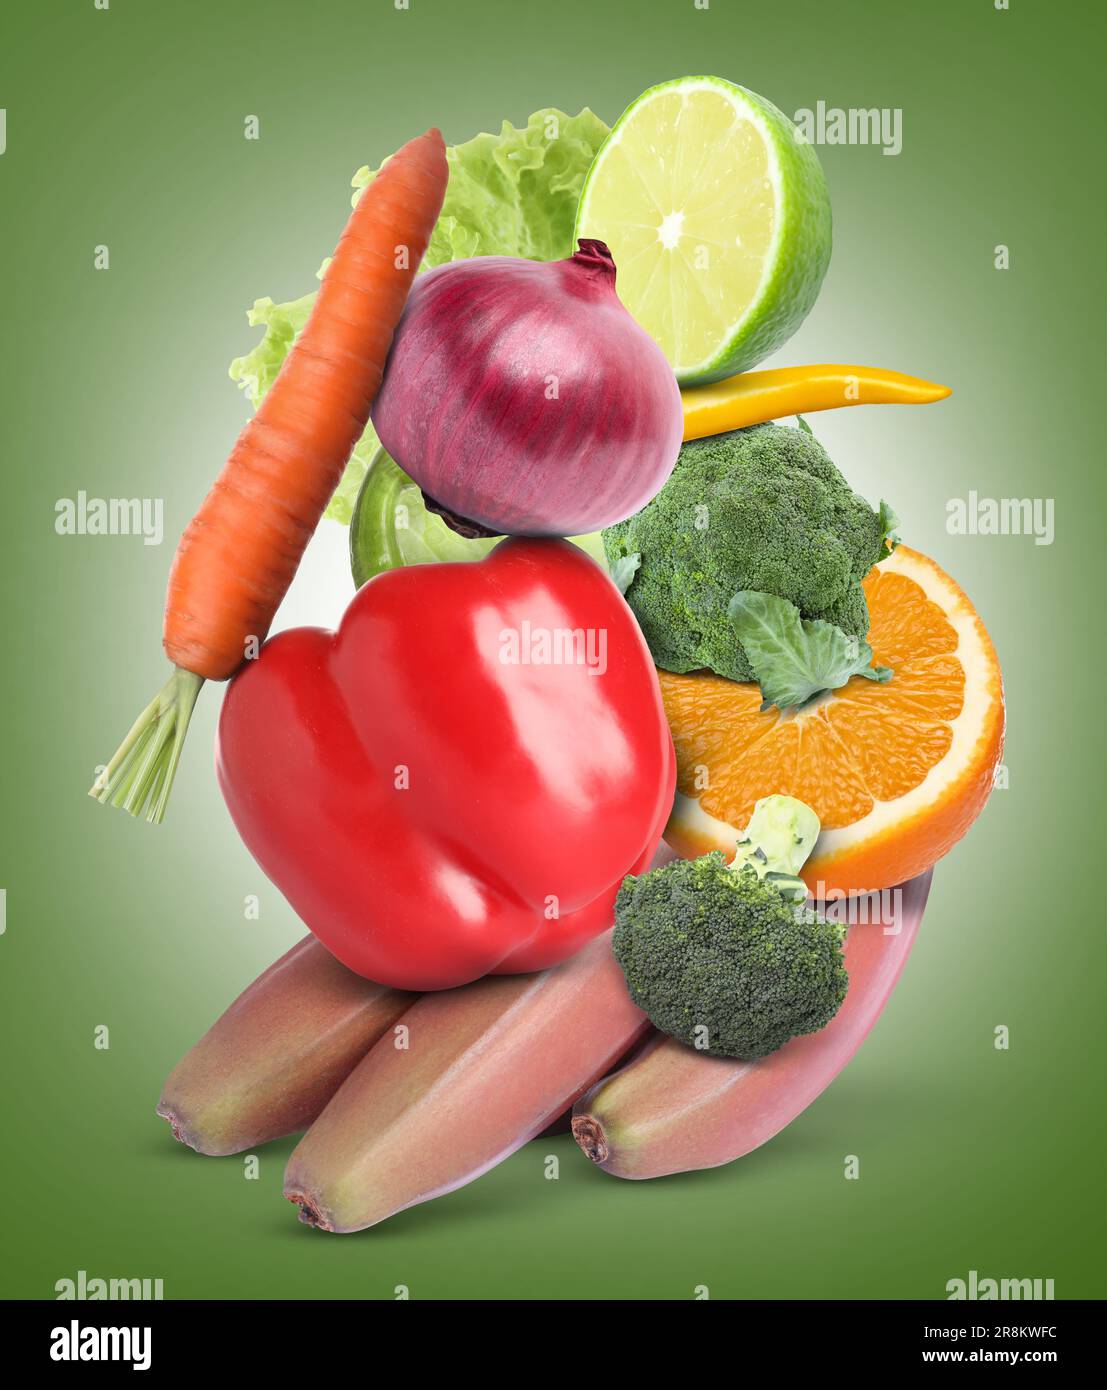 Stack of different vegetables and fruits on pale green background Stock Photo